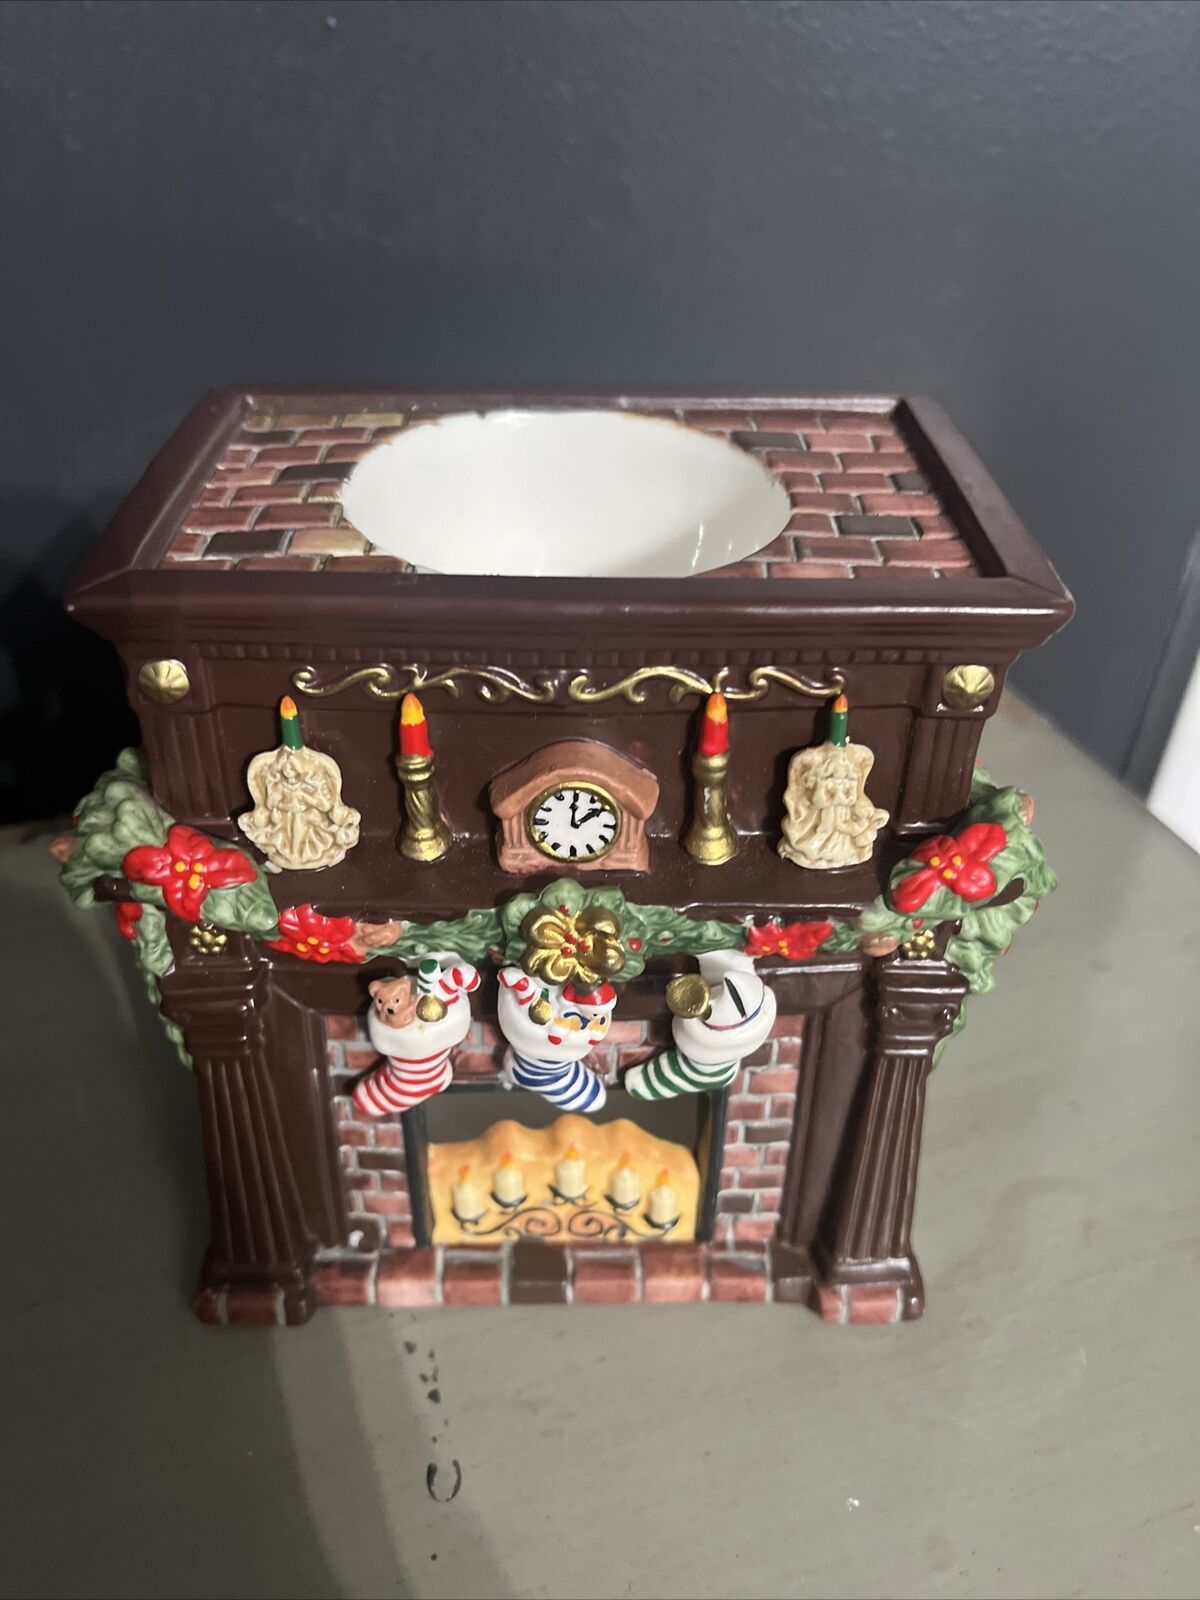 Partylite Hearthside Aroma Wax Melts Warmer Candle Holder P8115 Xmas Fireplace